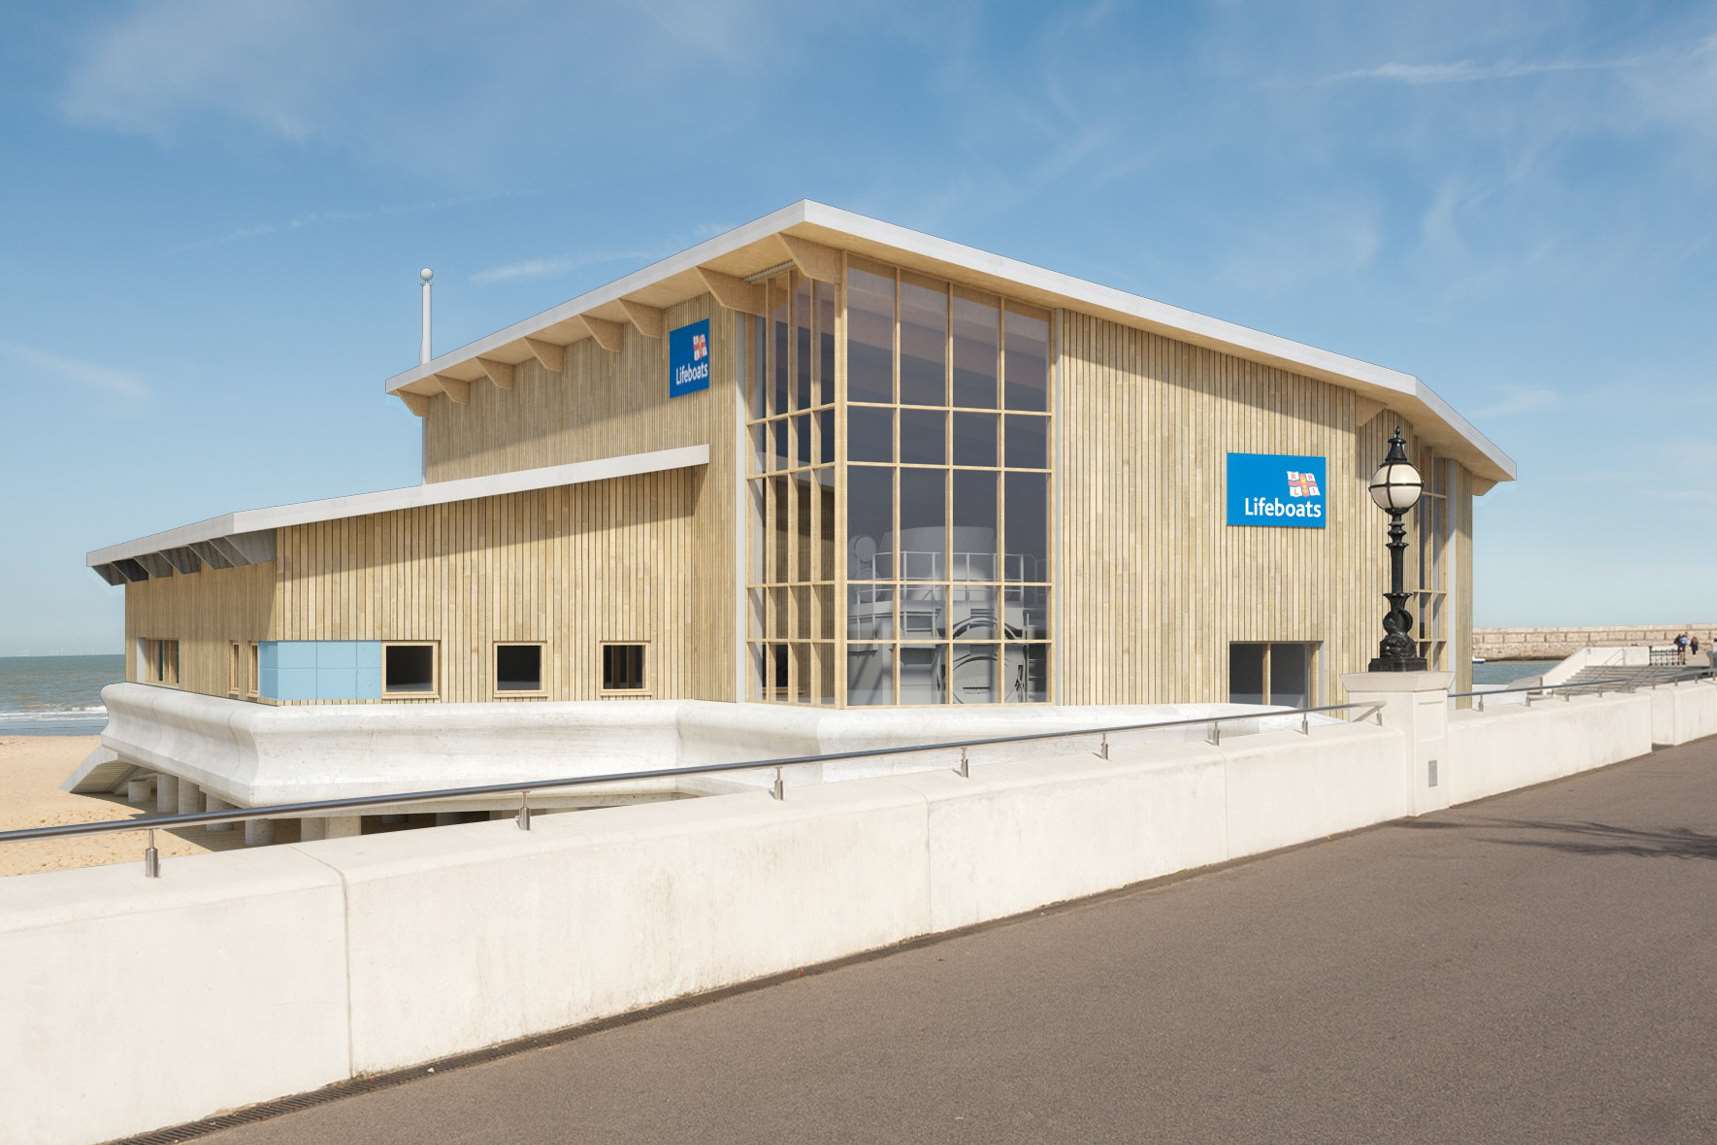 Studio Four Architects impression of the proposed Margate RNLI lifeboat station